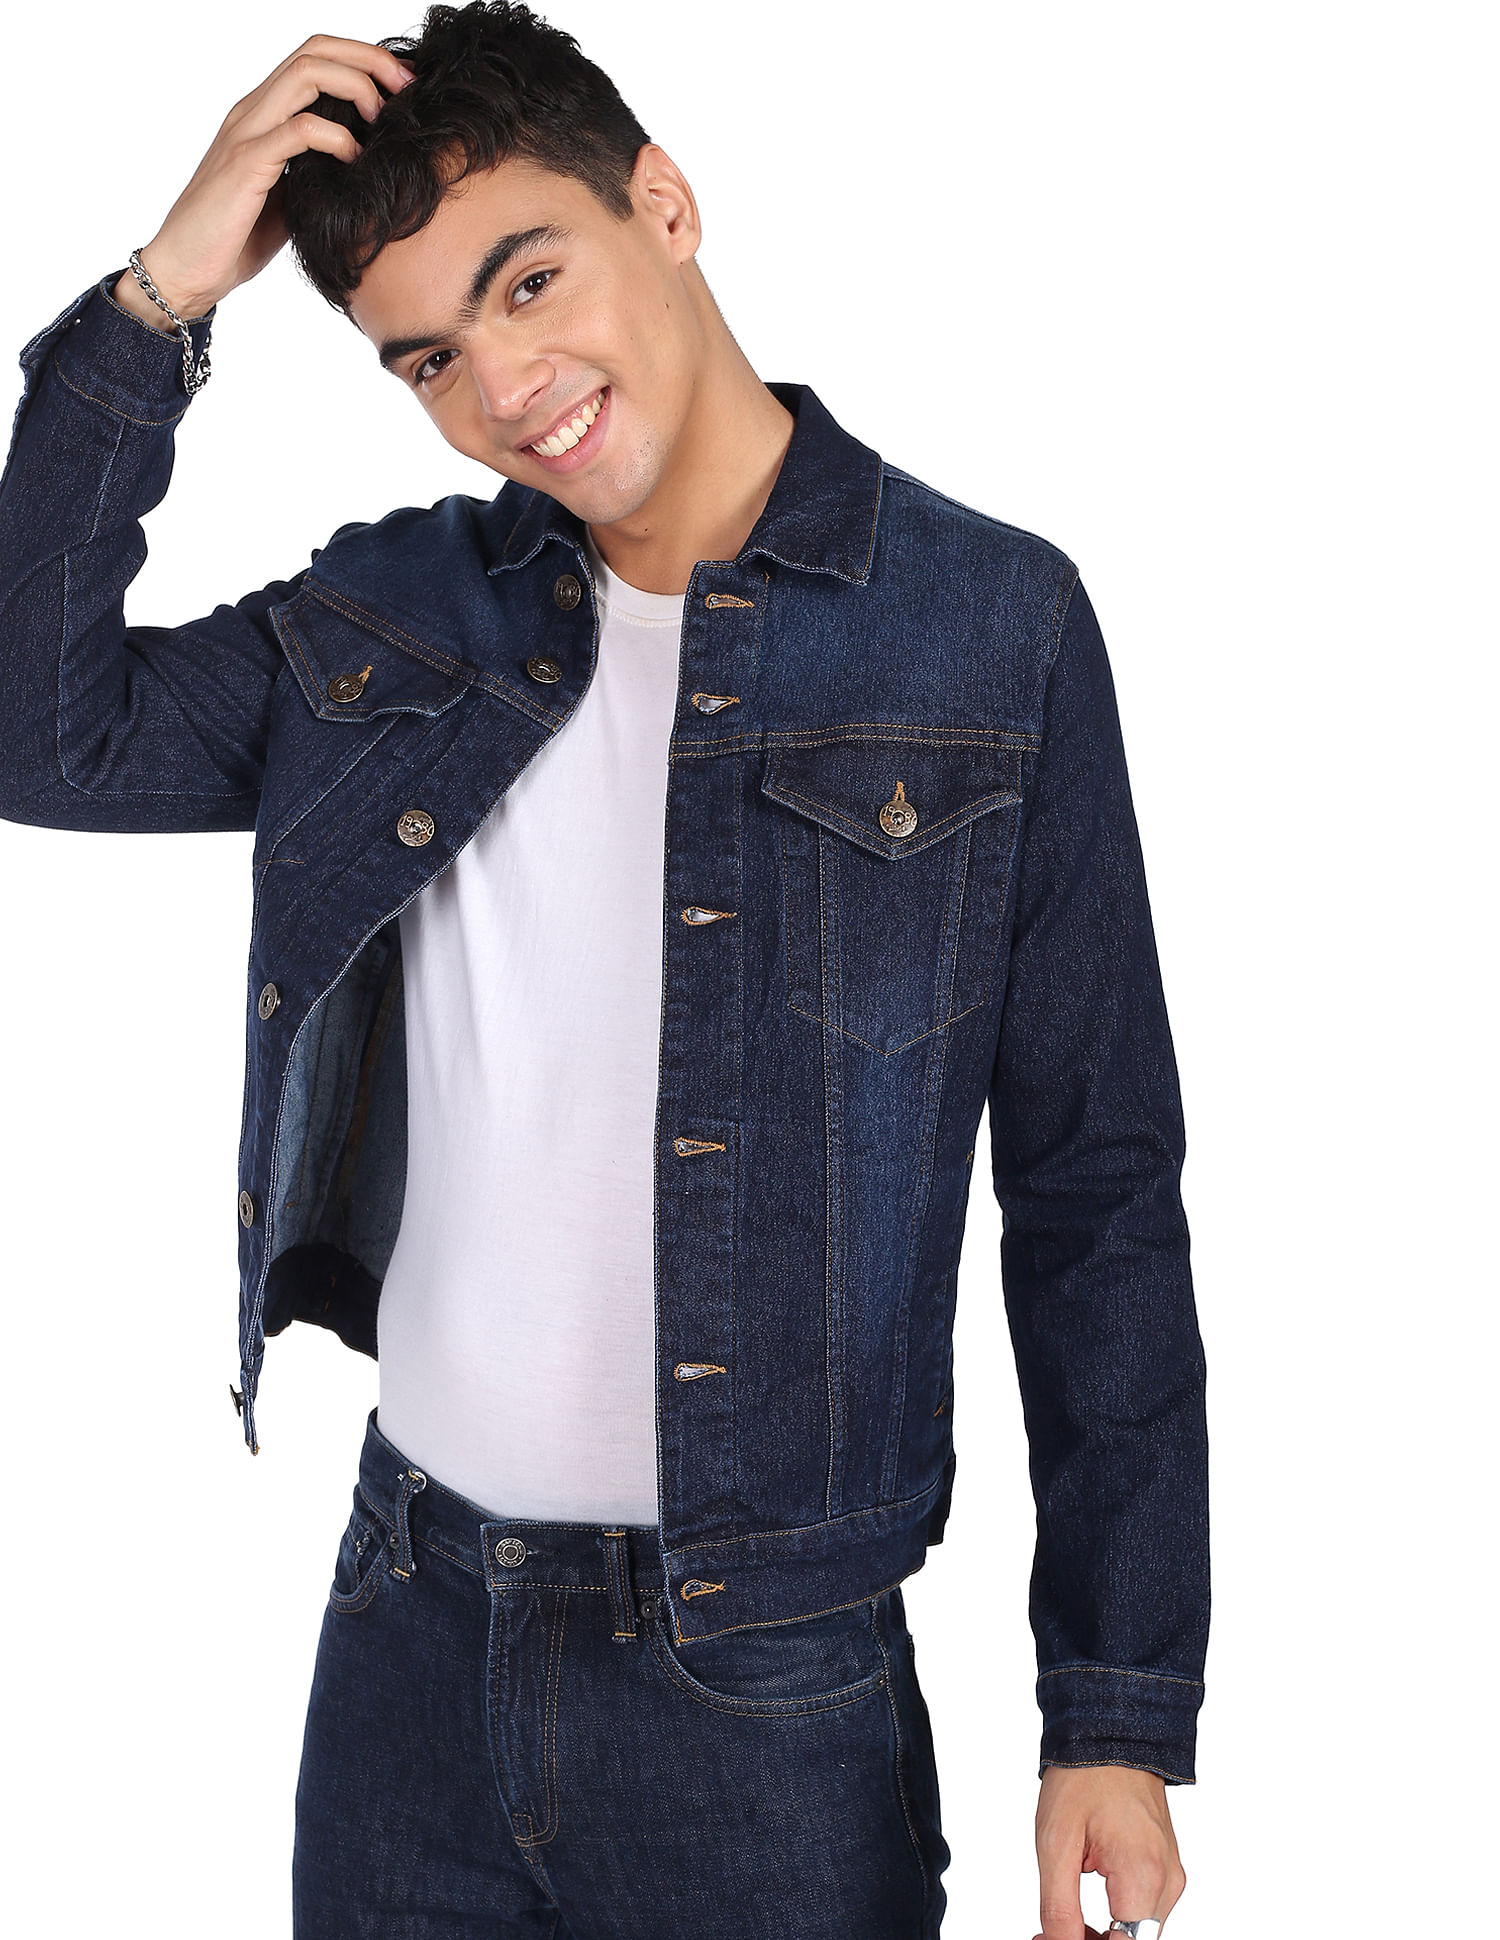 How To Wear A Denim Jacket For Men: Outfit And Style Guide 2024 |  FashionBeans-thanhphatduhoc.com.vn